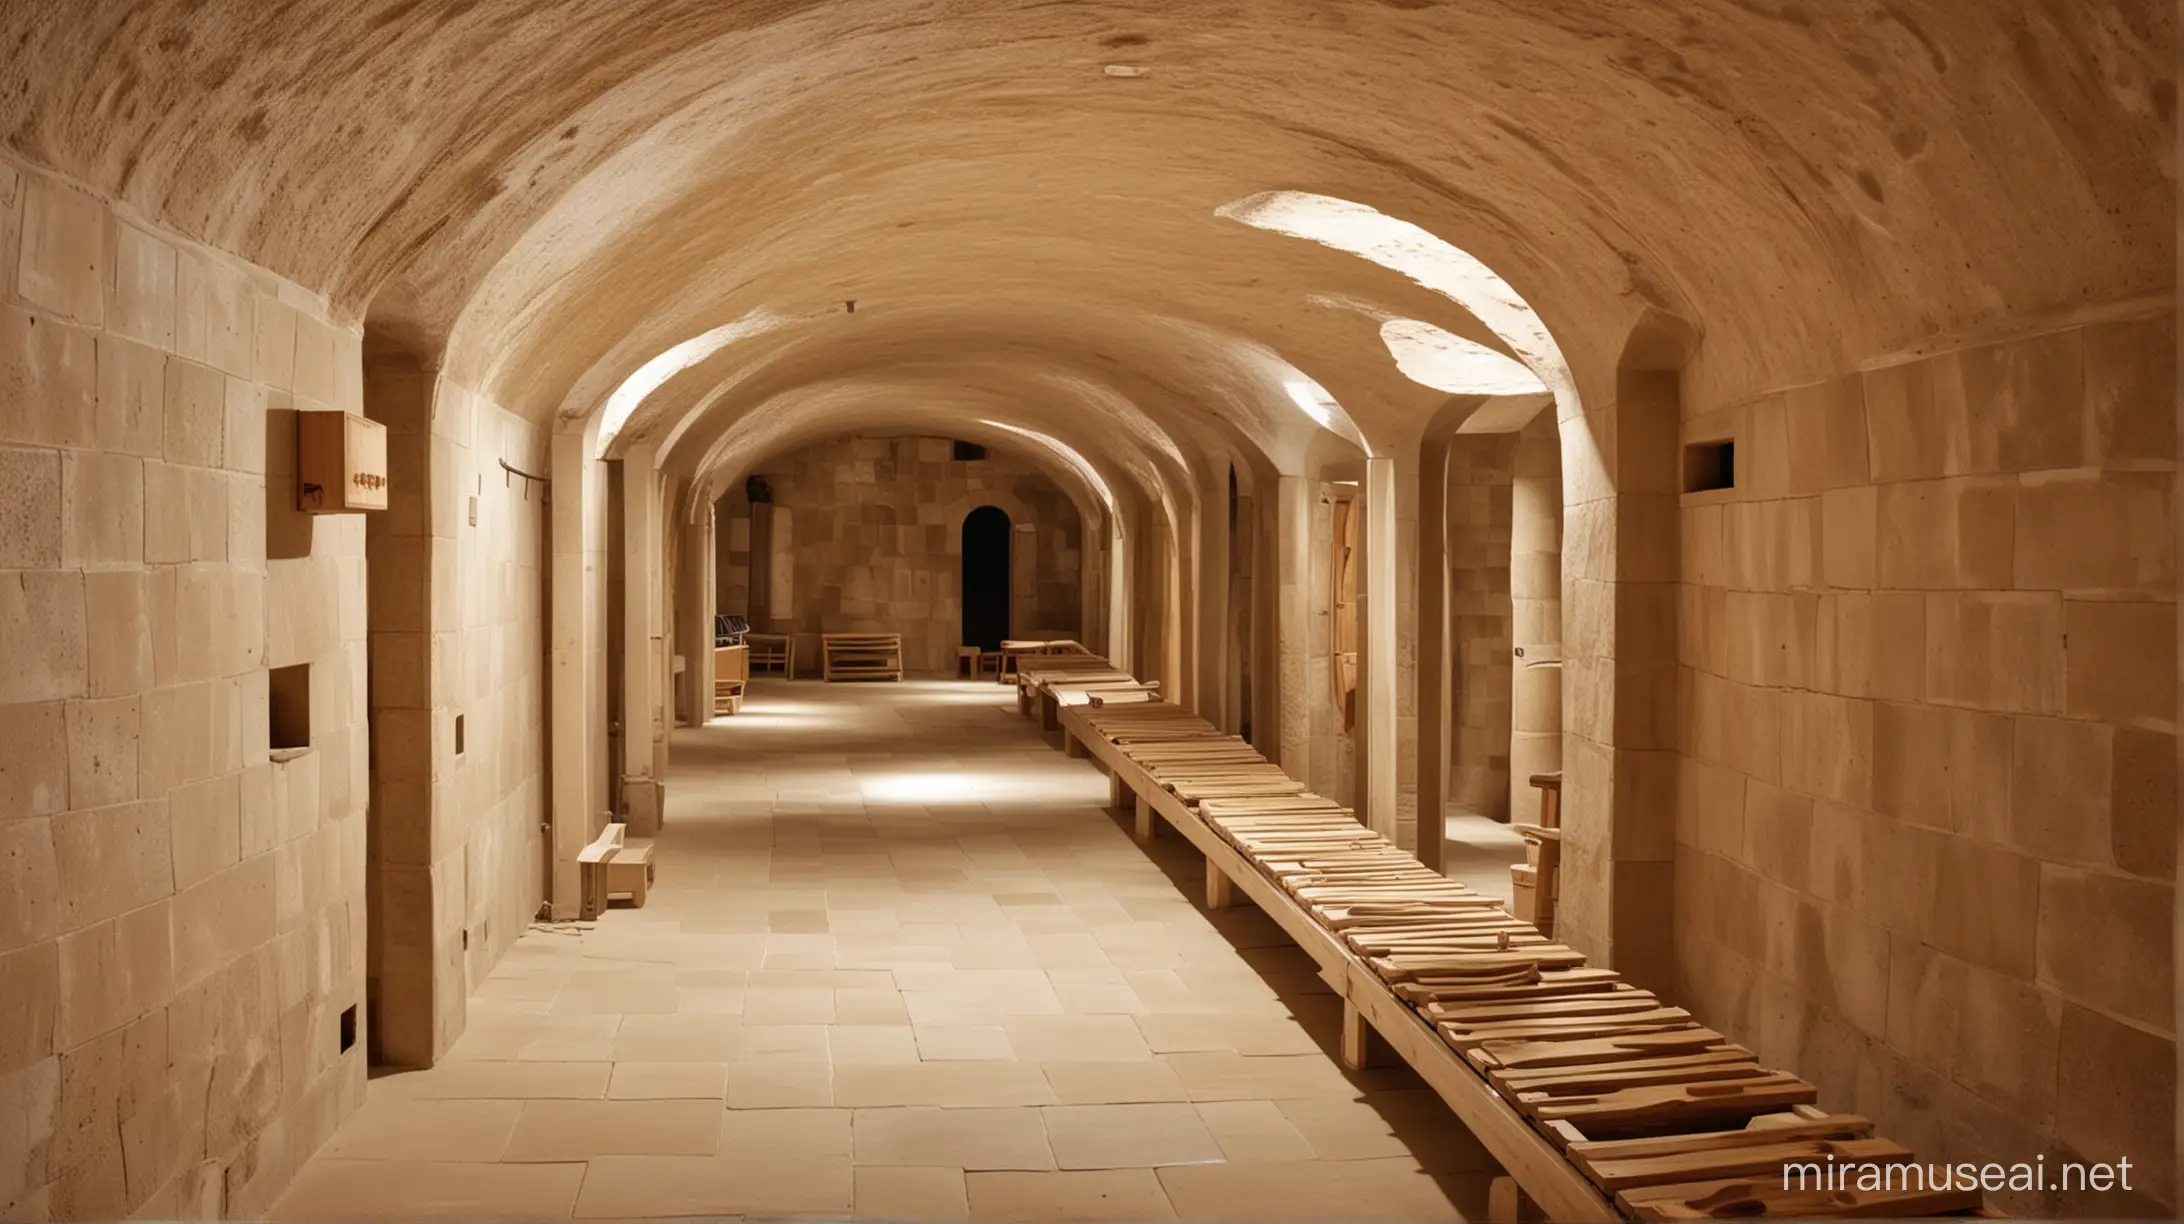 An elongated catacomb with vaulted ceilings and no windows, featuring installed saunas.